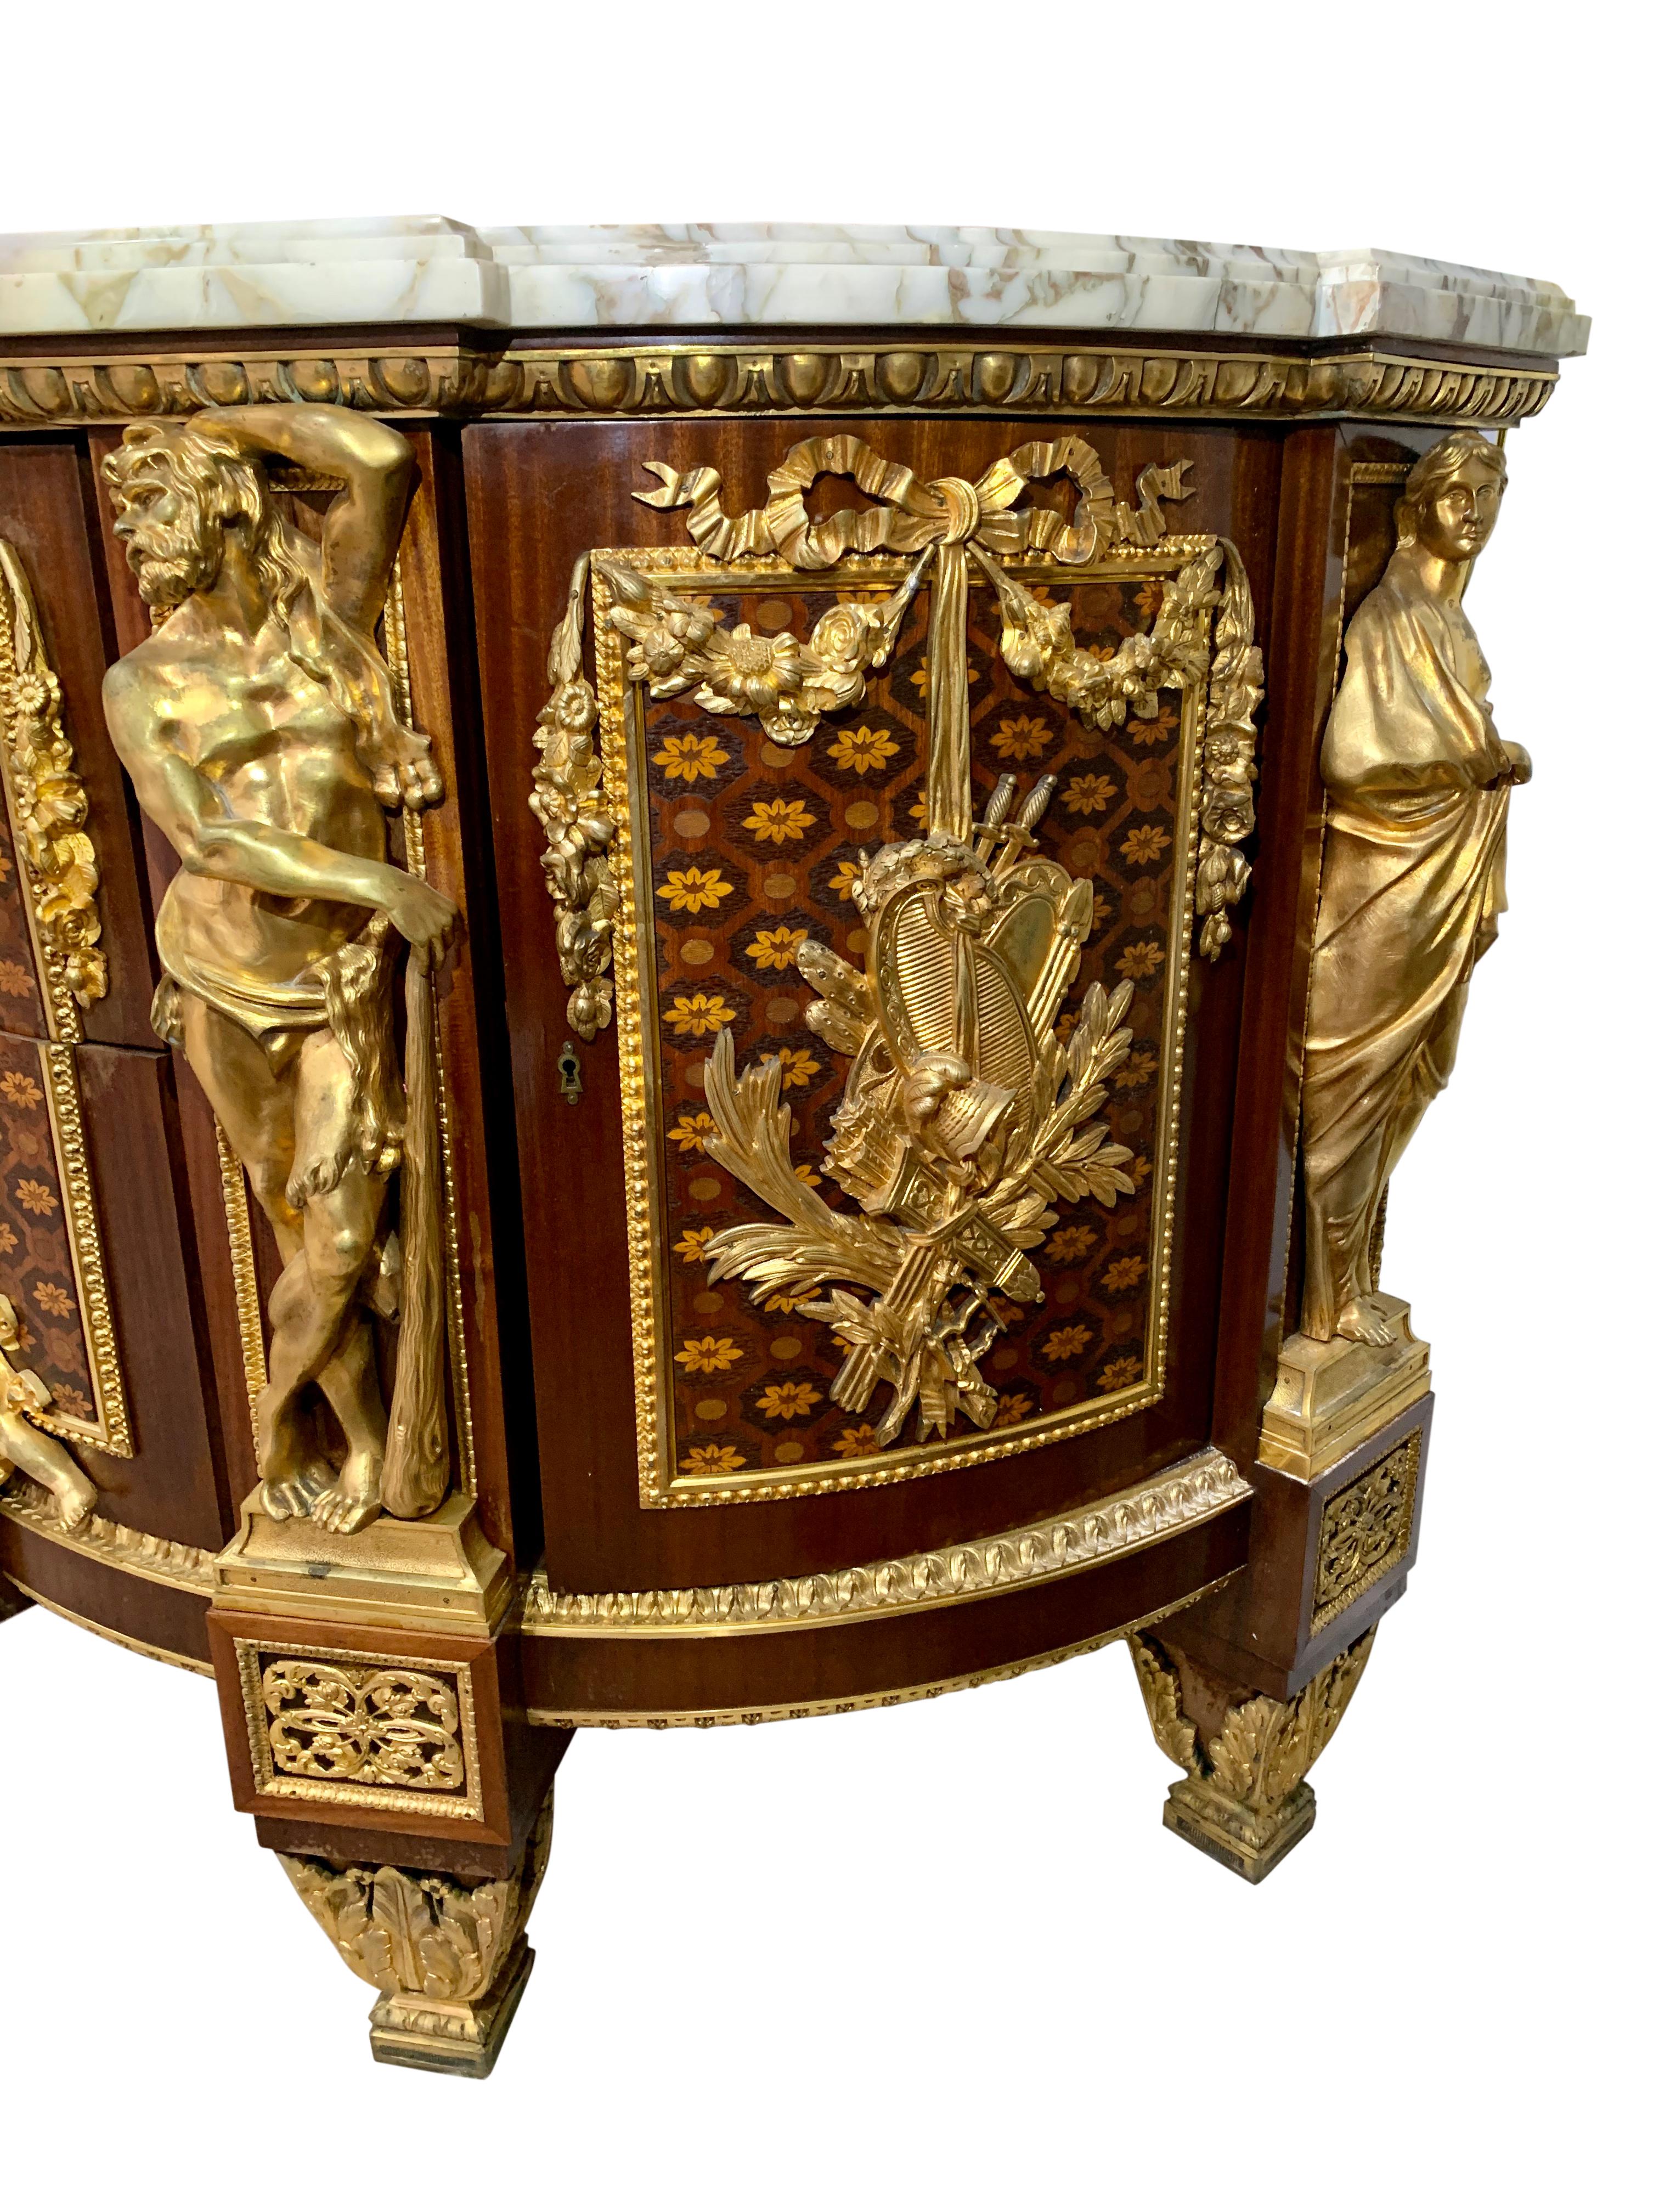 19th Century French Gilt-Bronze Mounted Commode after Jean-Henri Riesener For Sale 1